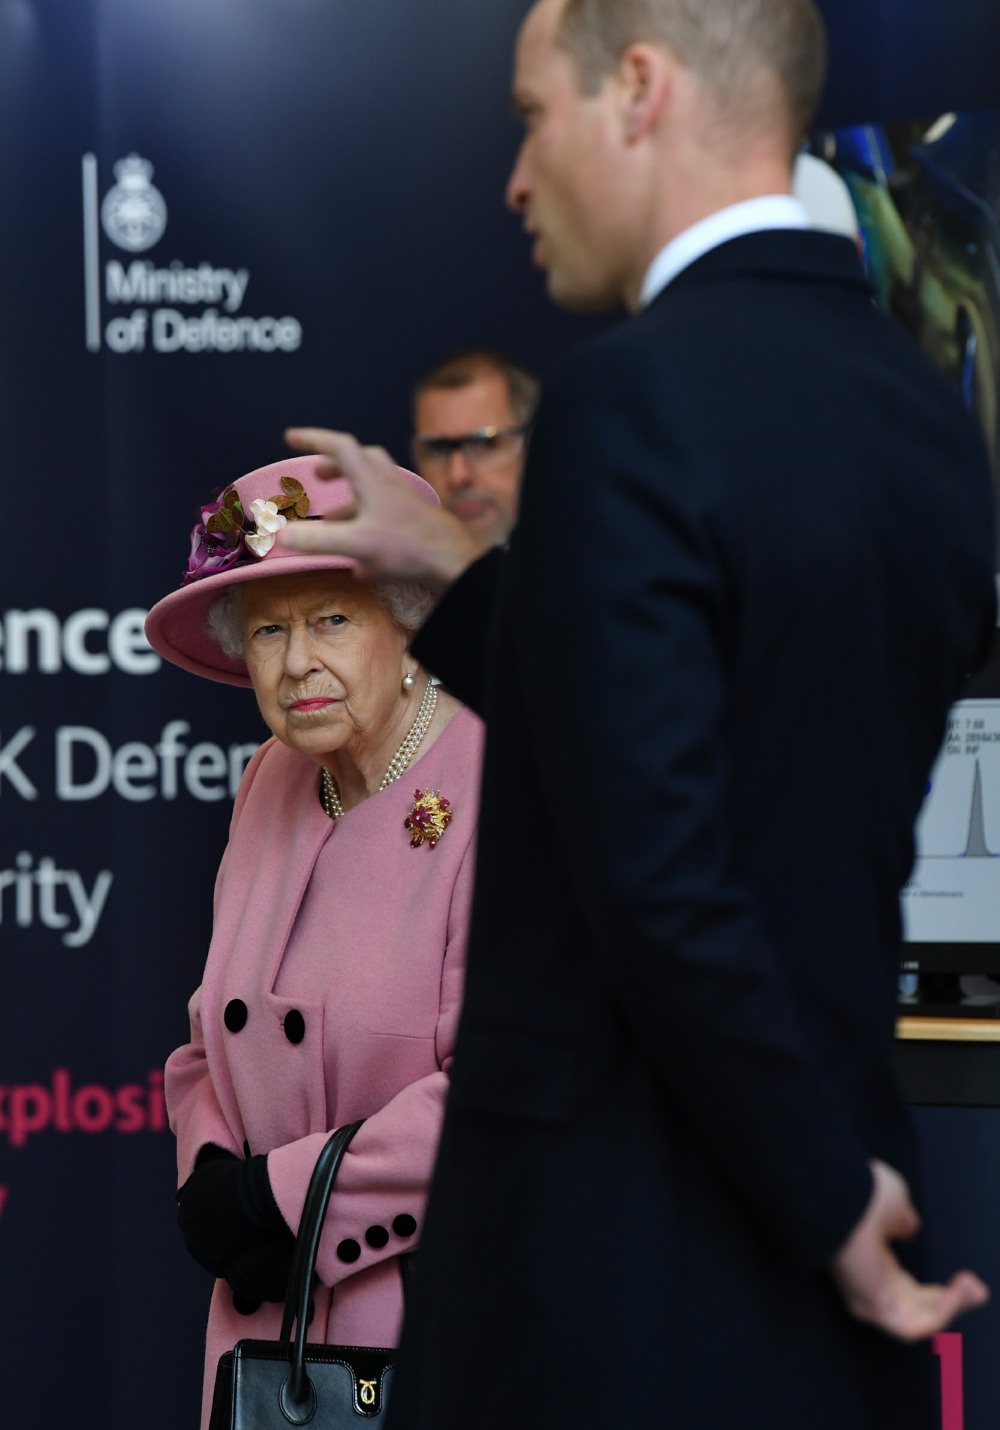 Britain's Queen Elizabeth II (L) looks on as Britain's Prince William, Duke of Cambridge (R) asks a question about forensics work as they visit the Energetics Analysis Centre as they visit the Defence Science and Technology Laboratory (Dstl) at Porton Down science park near Salisbury, southern England, on October 15, 2020. - The Queen and the Duke of Cambridge visited the Defence Science and Technology Laboratory (Dstl) where they were to view displays of weaponry and tactics used in counter intelligence, a demonstration of a Forensic Explosives Investigation and meet staff who were involved in the Salisbury Novichok incident. Her Majesty and His Royal Highness also formally opened the new Energetics Analysis Centre.